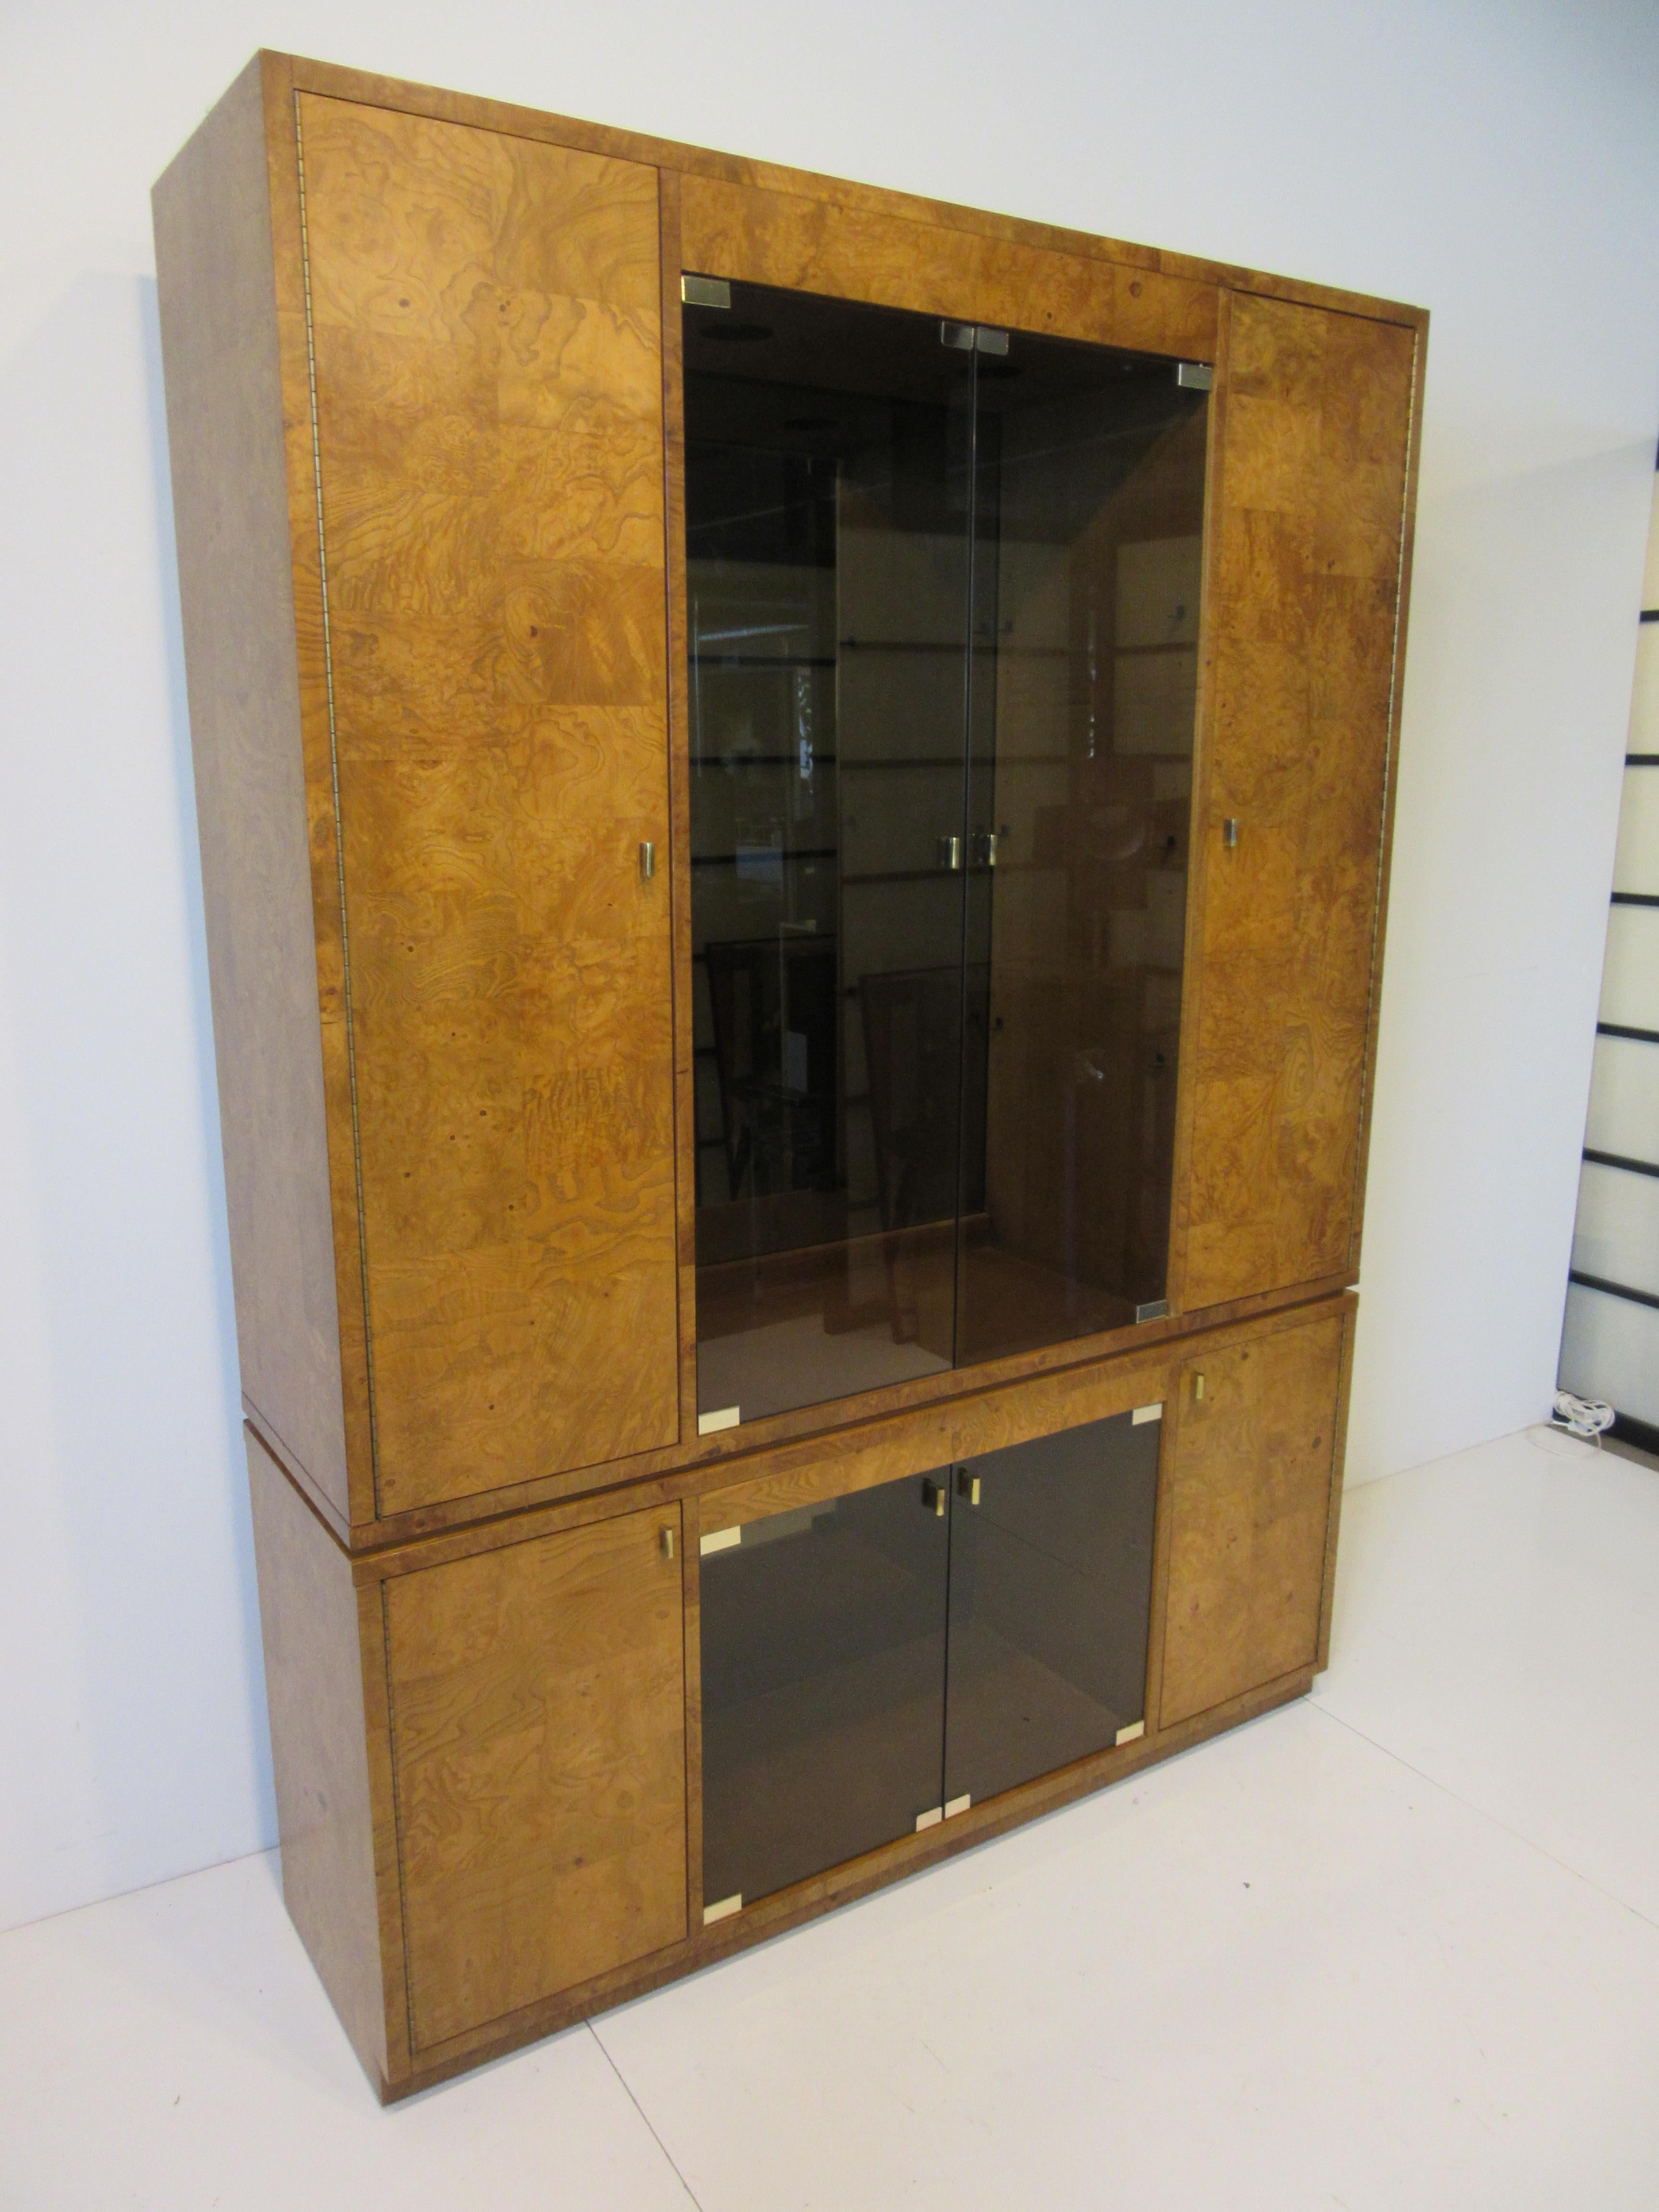 A very well constructed two piece wall unit / cabinet or bookcase in a medium toned burl wood having smoked glass doors and brass pulls and brass piano hinges. The upper piece has three adjustable glass shelves and to each side doors with three